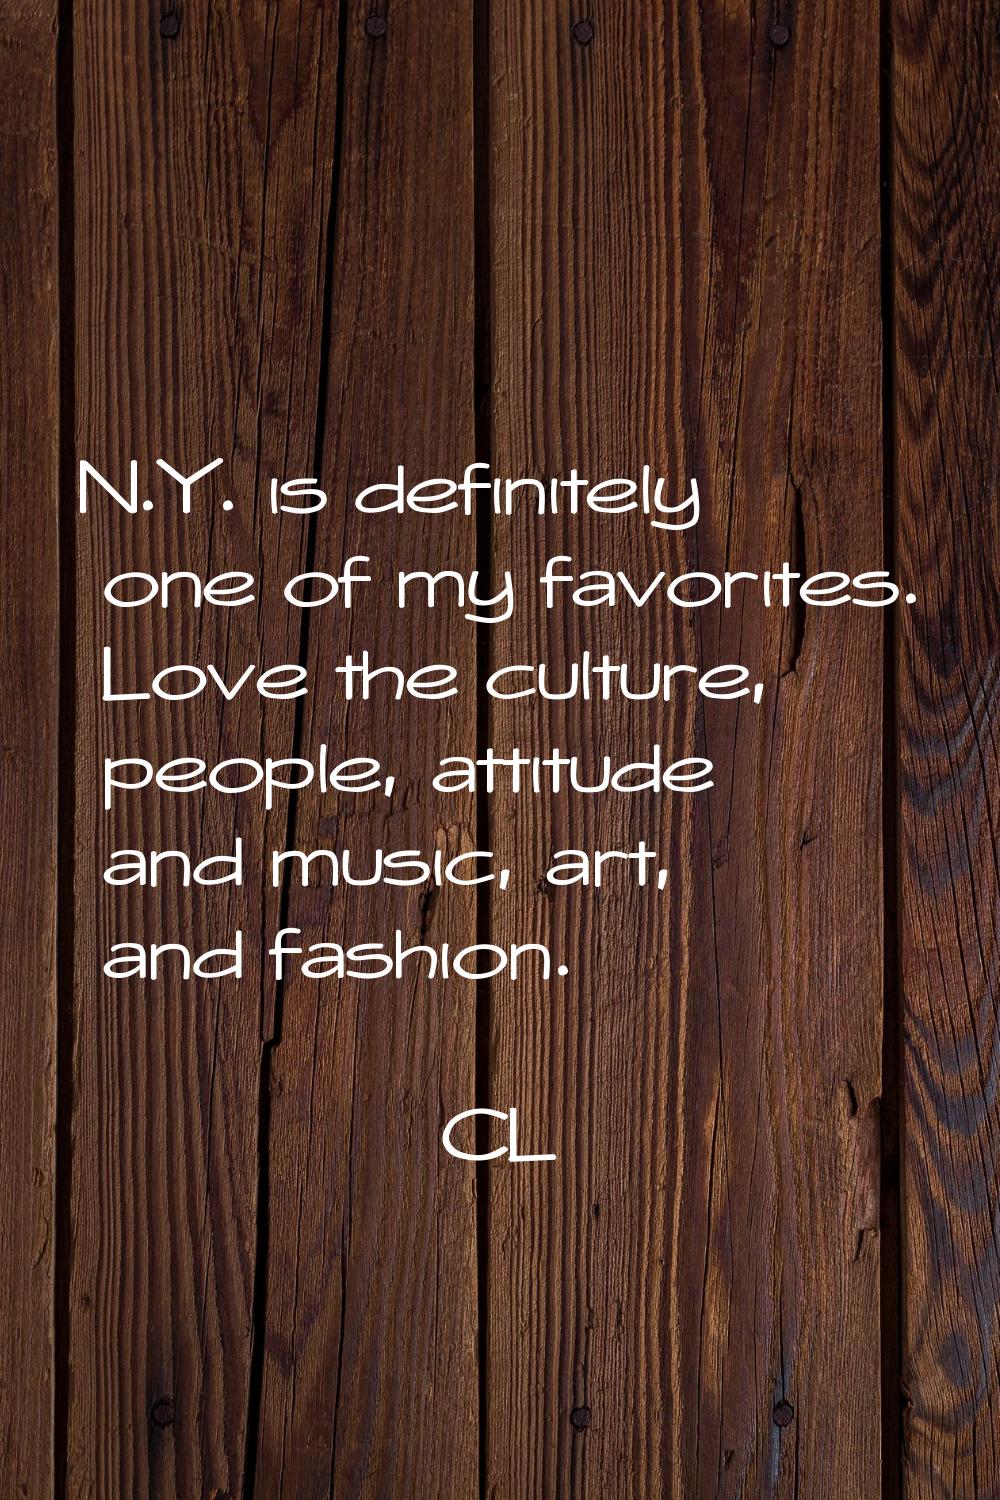 N.Y. is definitely one of my favorites. Love the culture, people, attitude and music, art, and fash